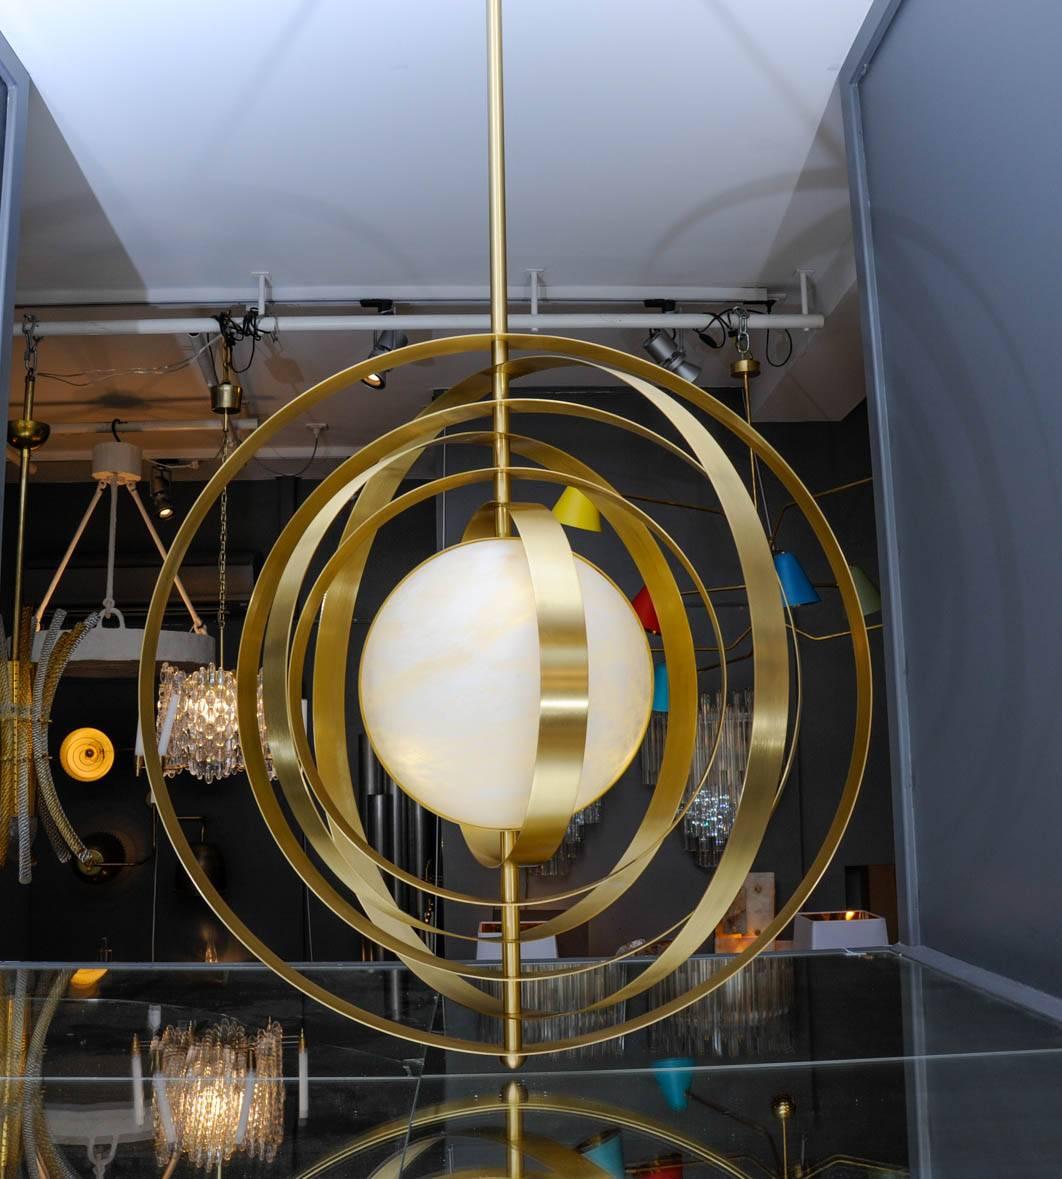 New design by Glustin Luminaires, massive alabaster globe suspension with six brass rings gravitating around it. Each ring is independent and can be placed however you'd like.